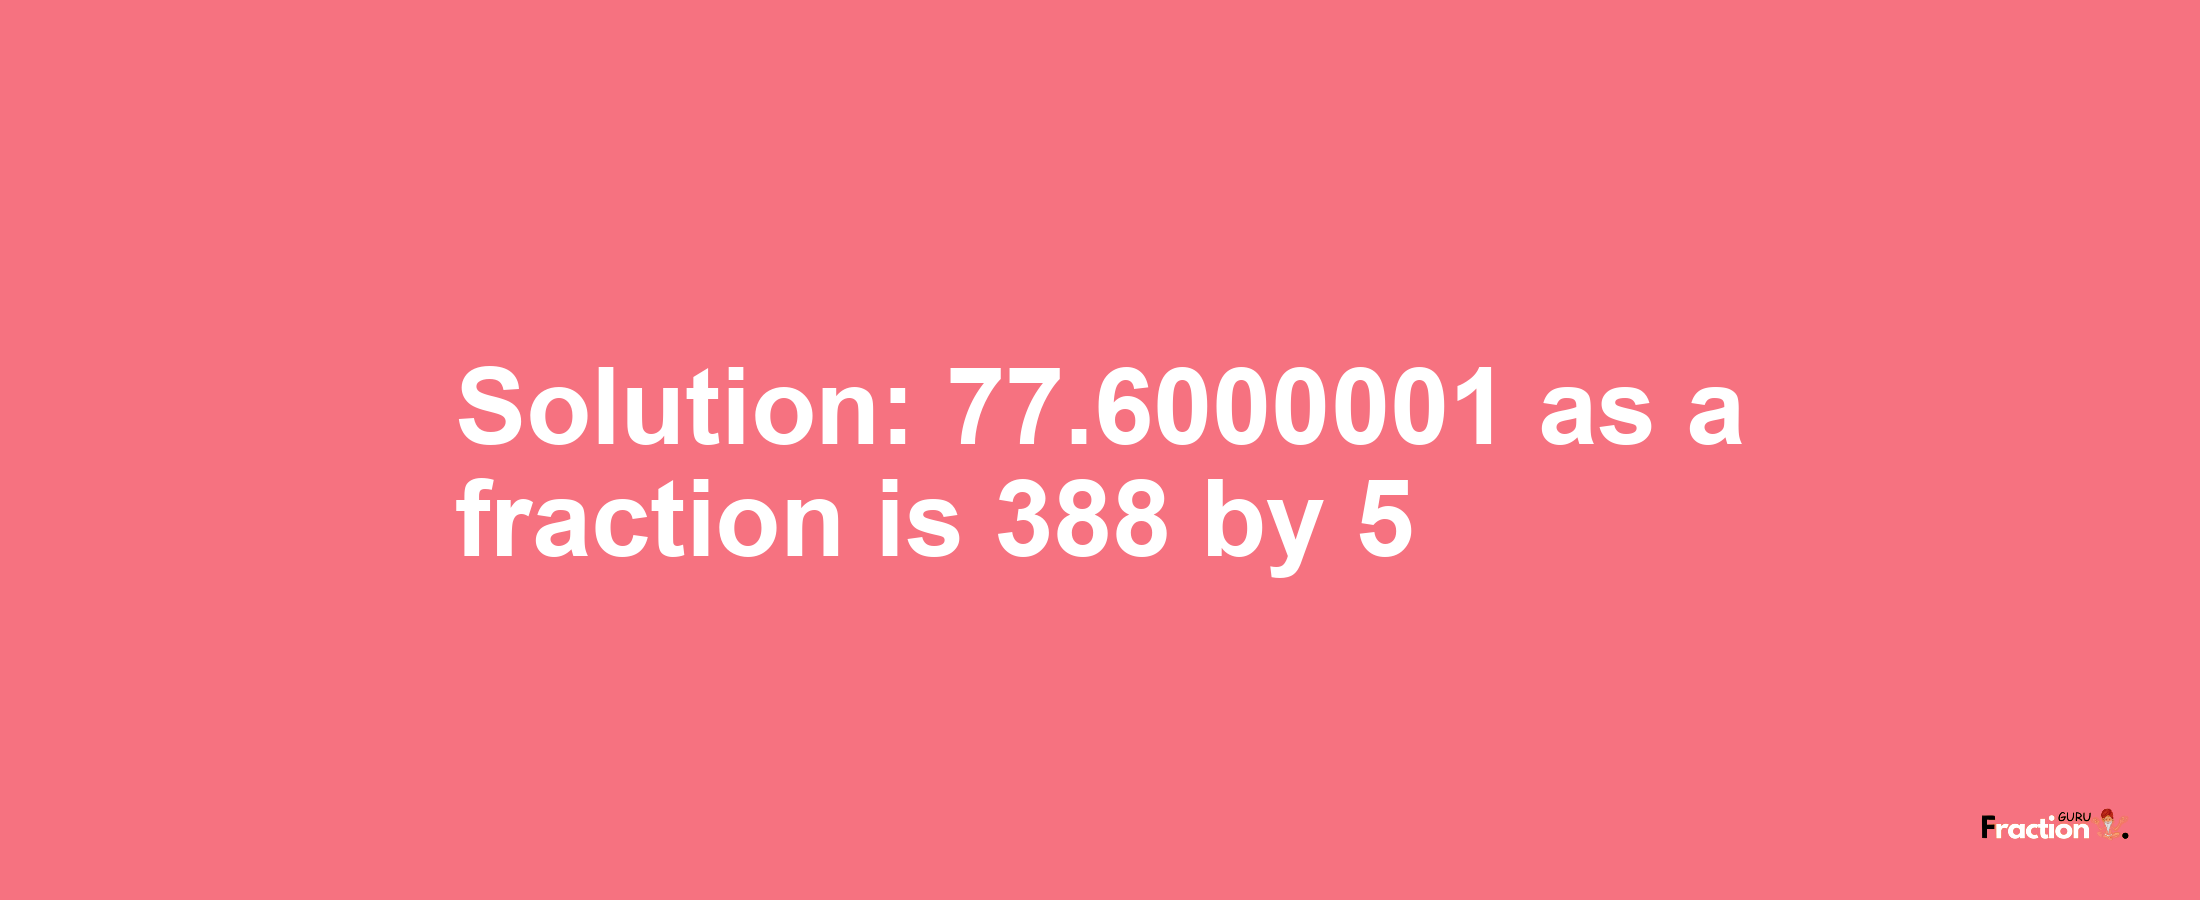 Solution:77.6000001 as a fraction is 388/5